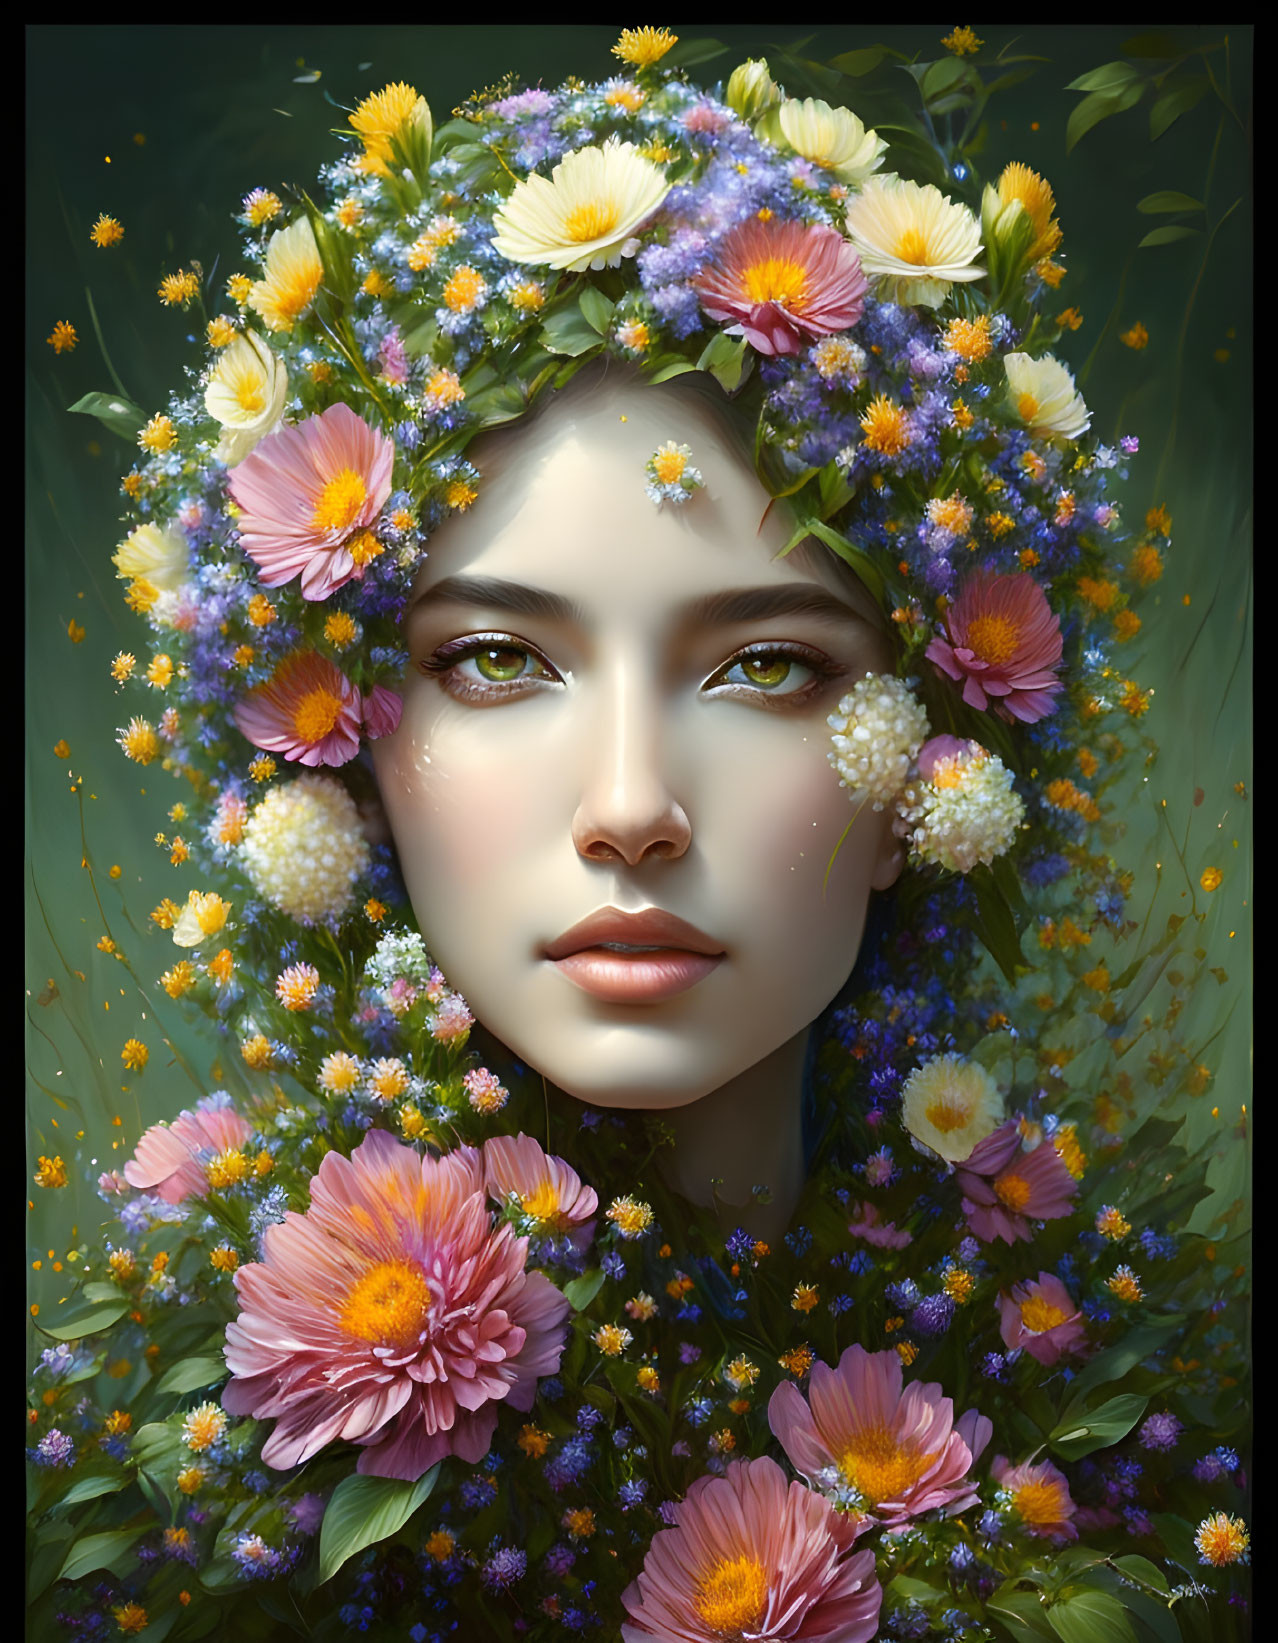 Digital portrait of woman with serene expression and floral wreath in colorful flower setting